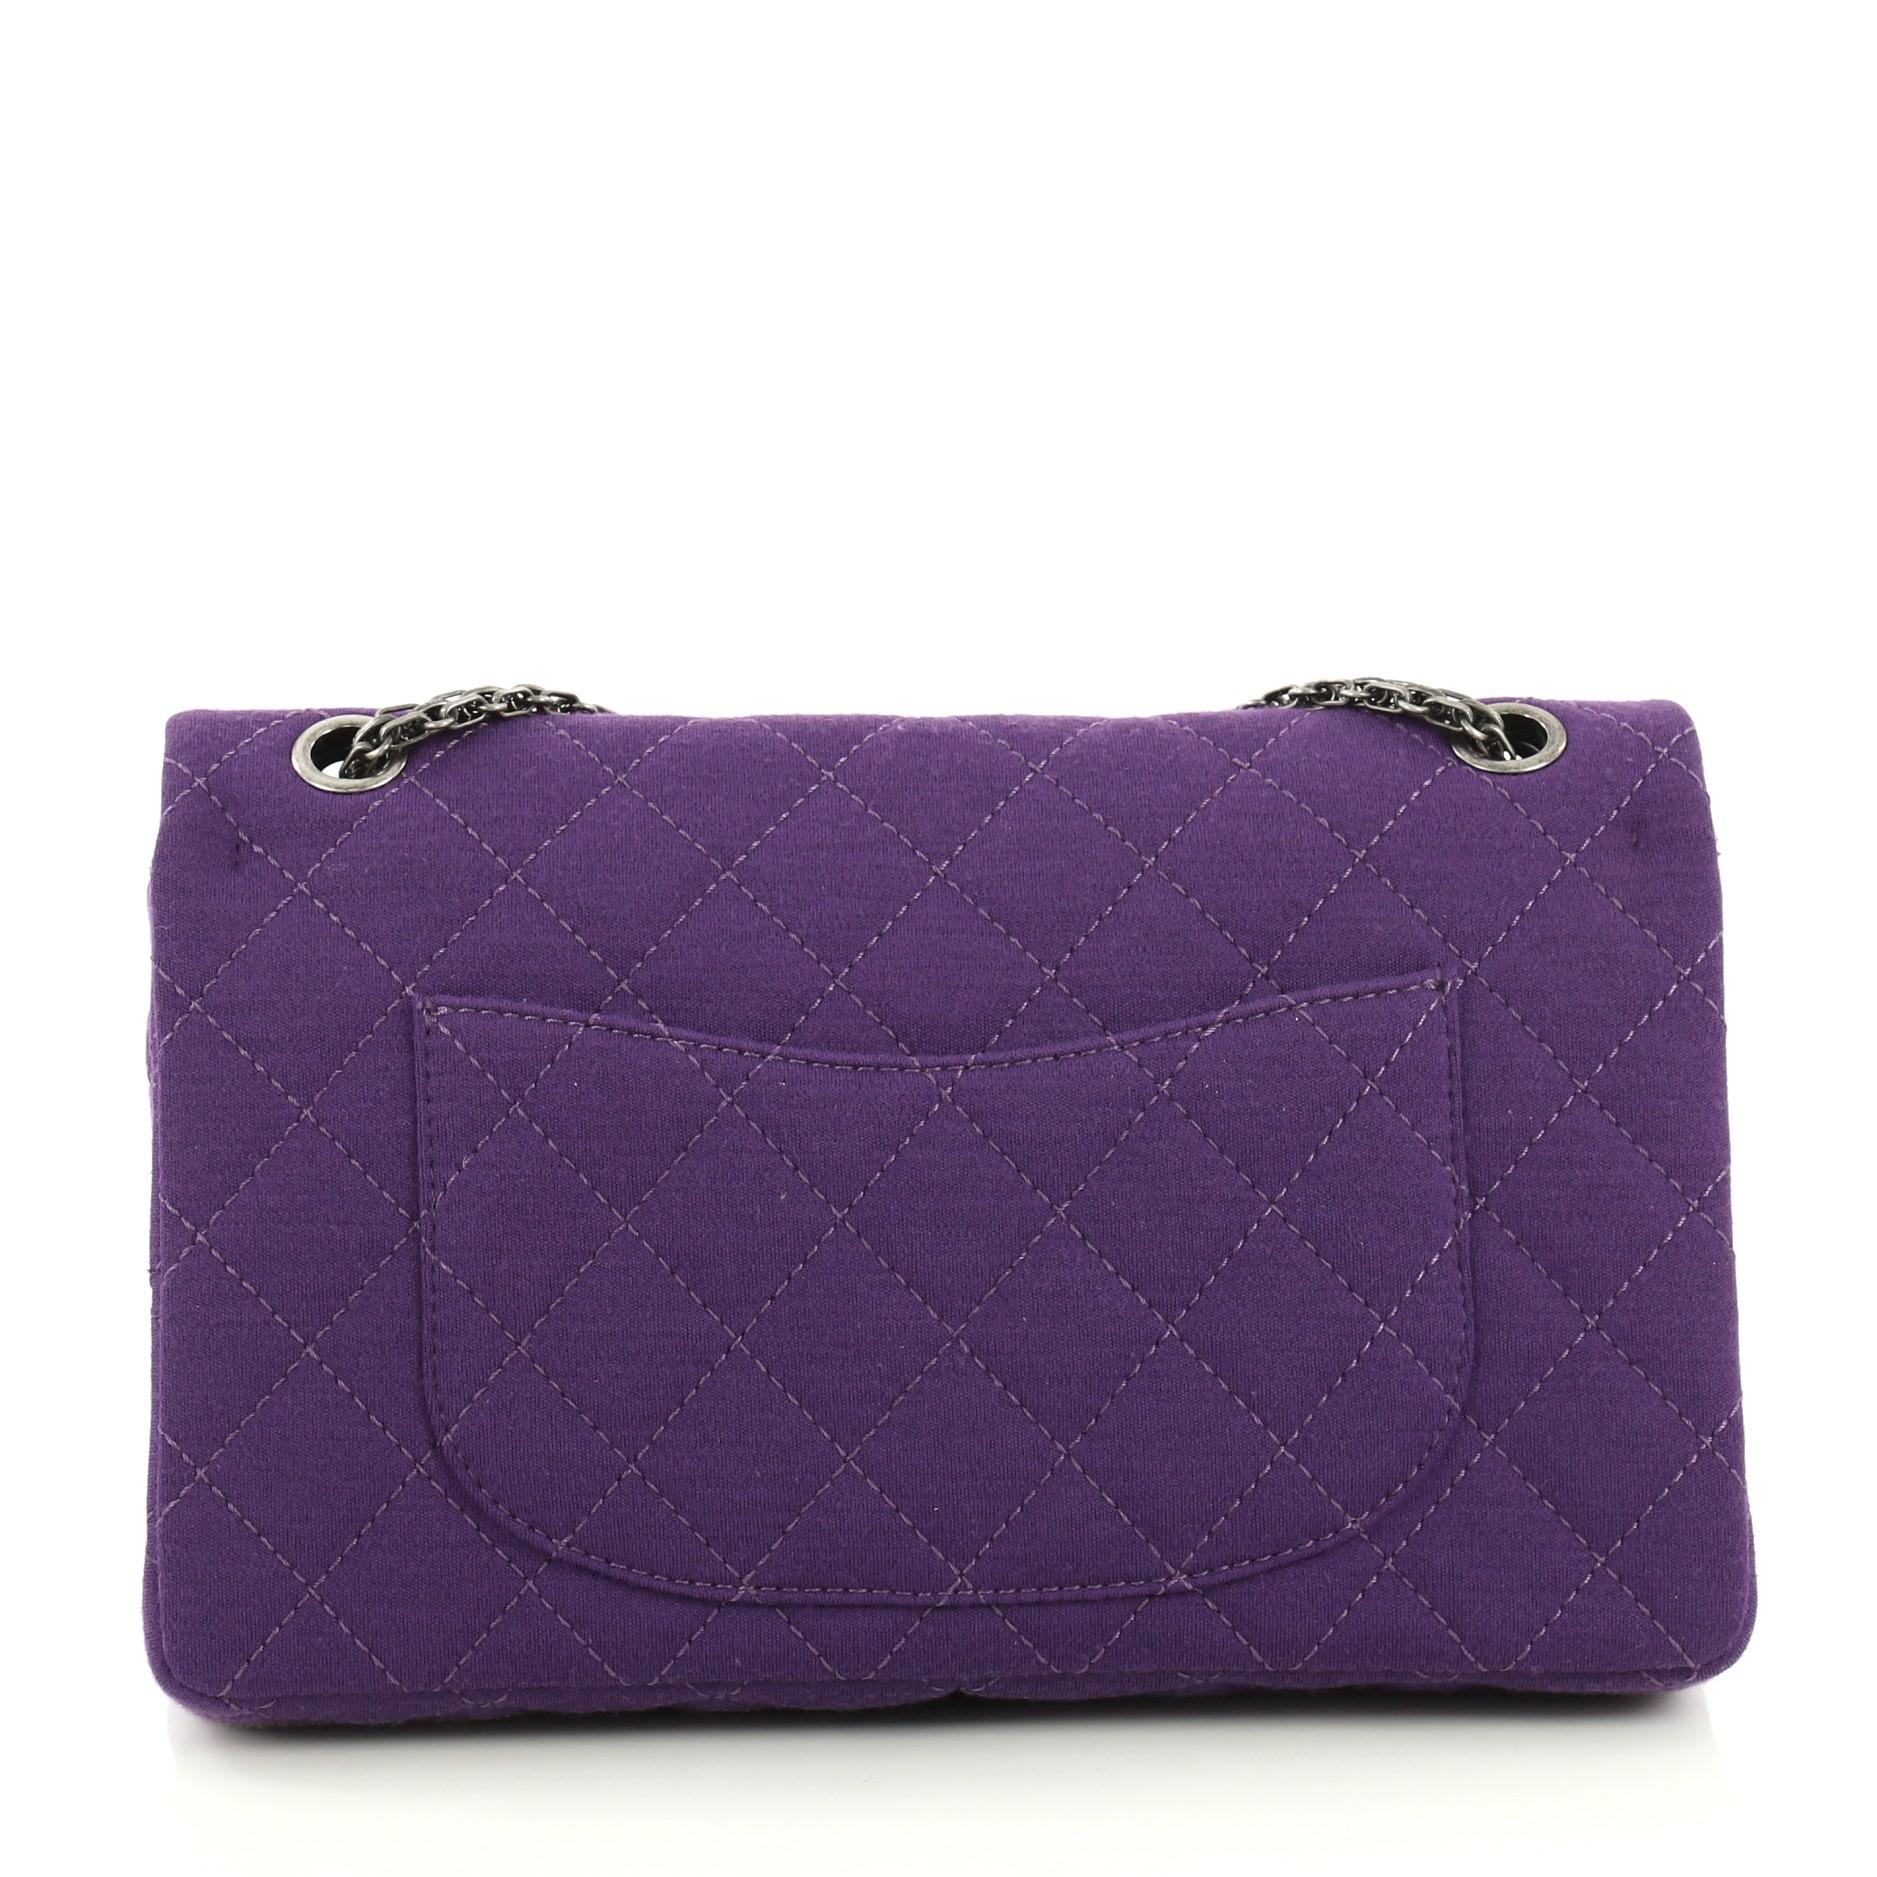 Purple Chanel Reissue 2.55 Flap Bag Quilted Jersey 226